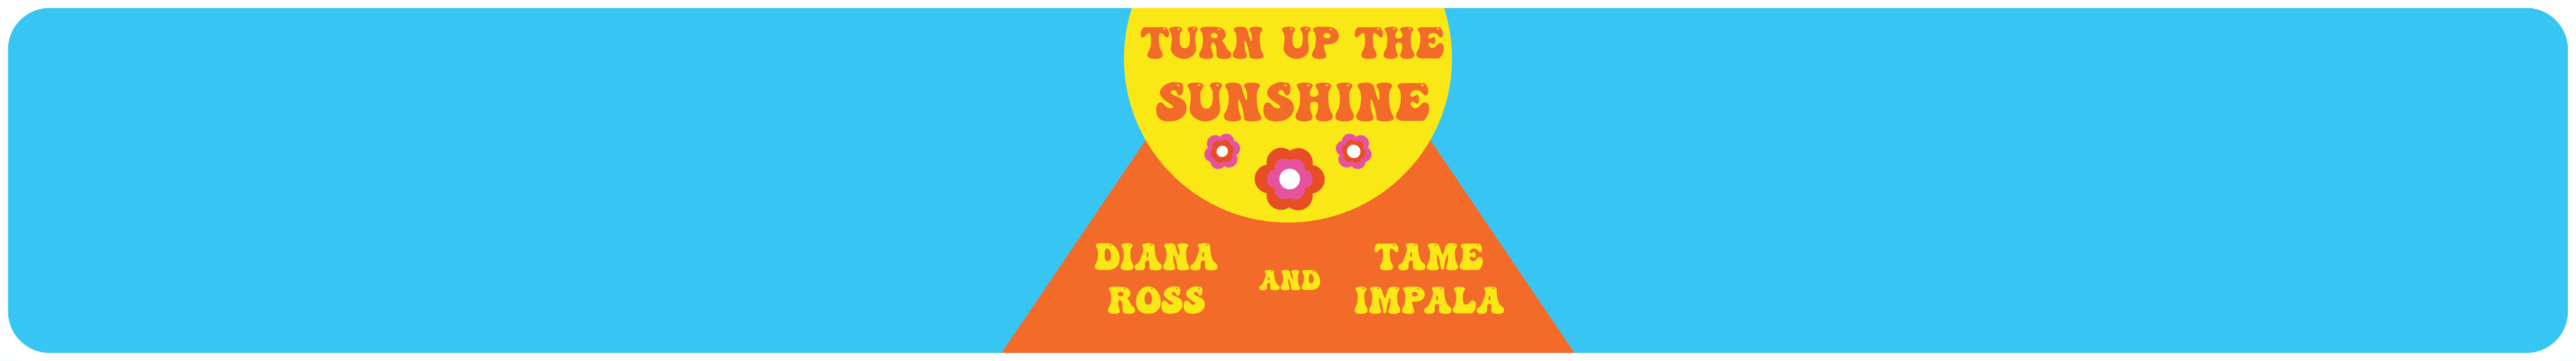 Pick of the Week: Diana Ross and Tame Impala "Turning Up the Sunshine"